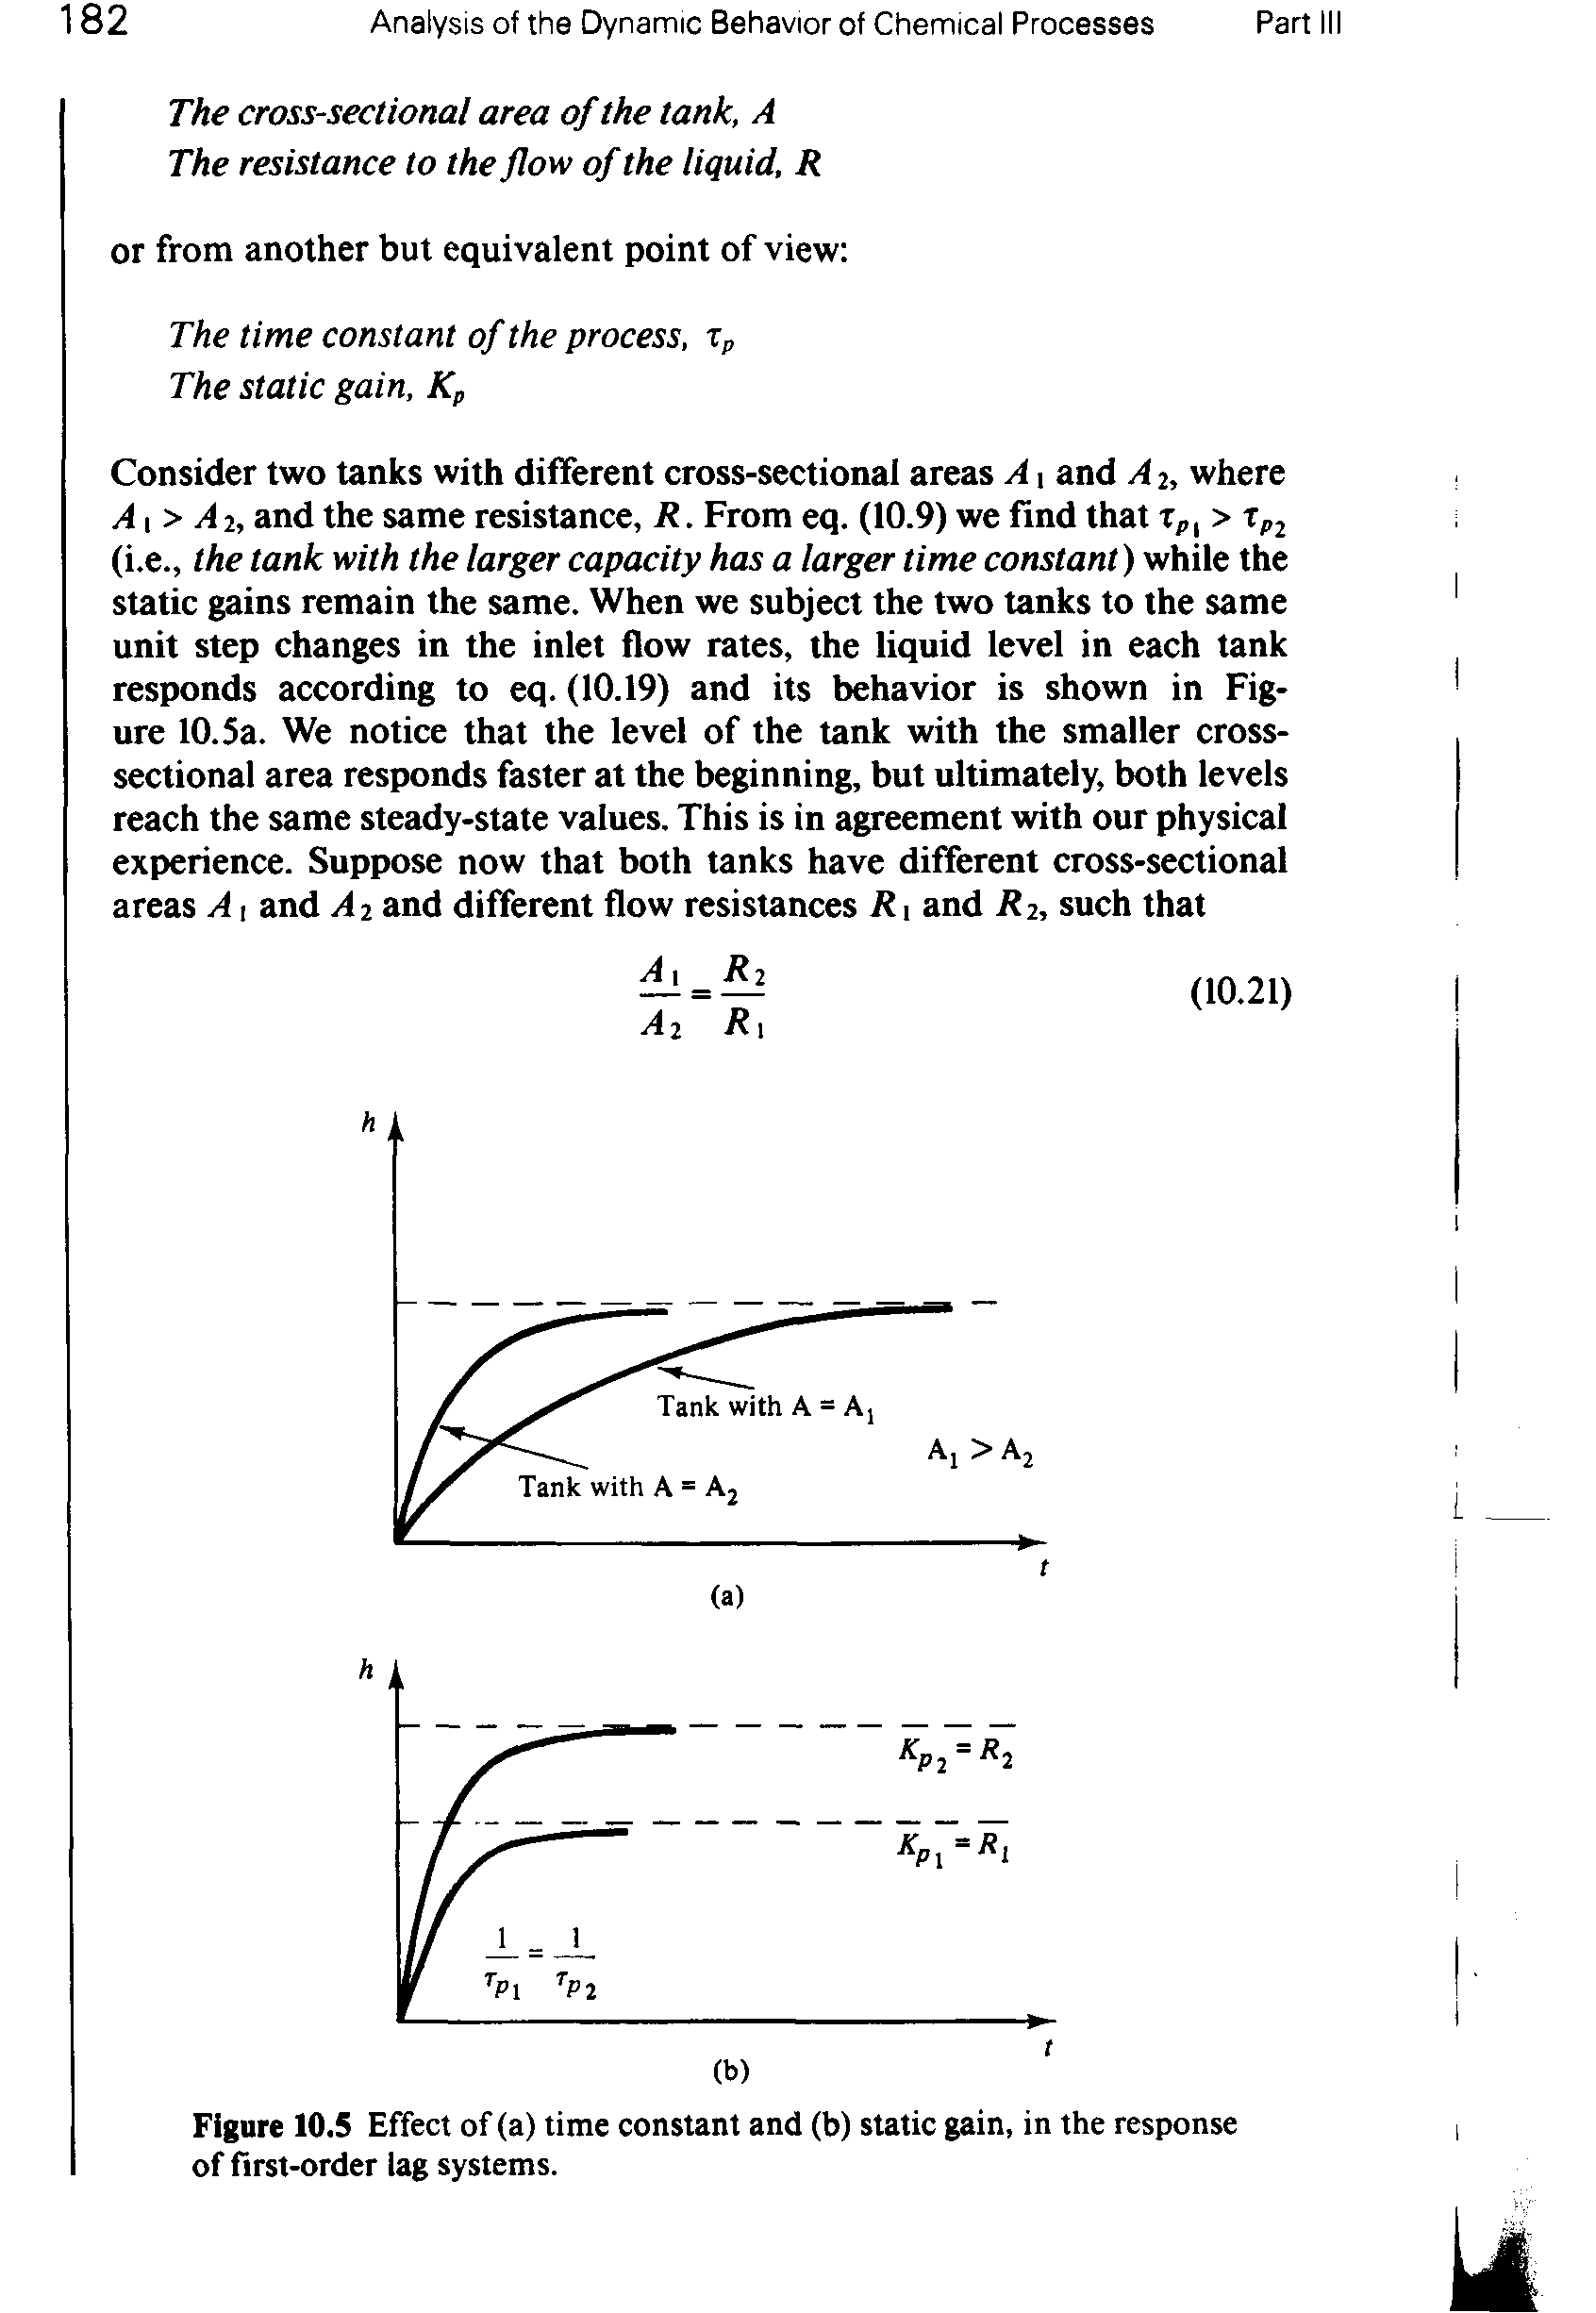 Figure 10.5 Effect of (a) time constant and (b) static gain, in the response of first-order lag systems.